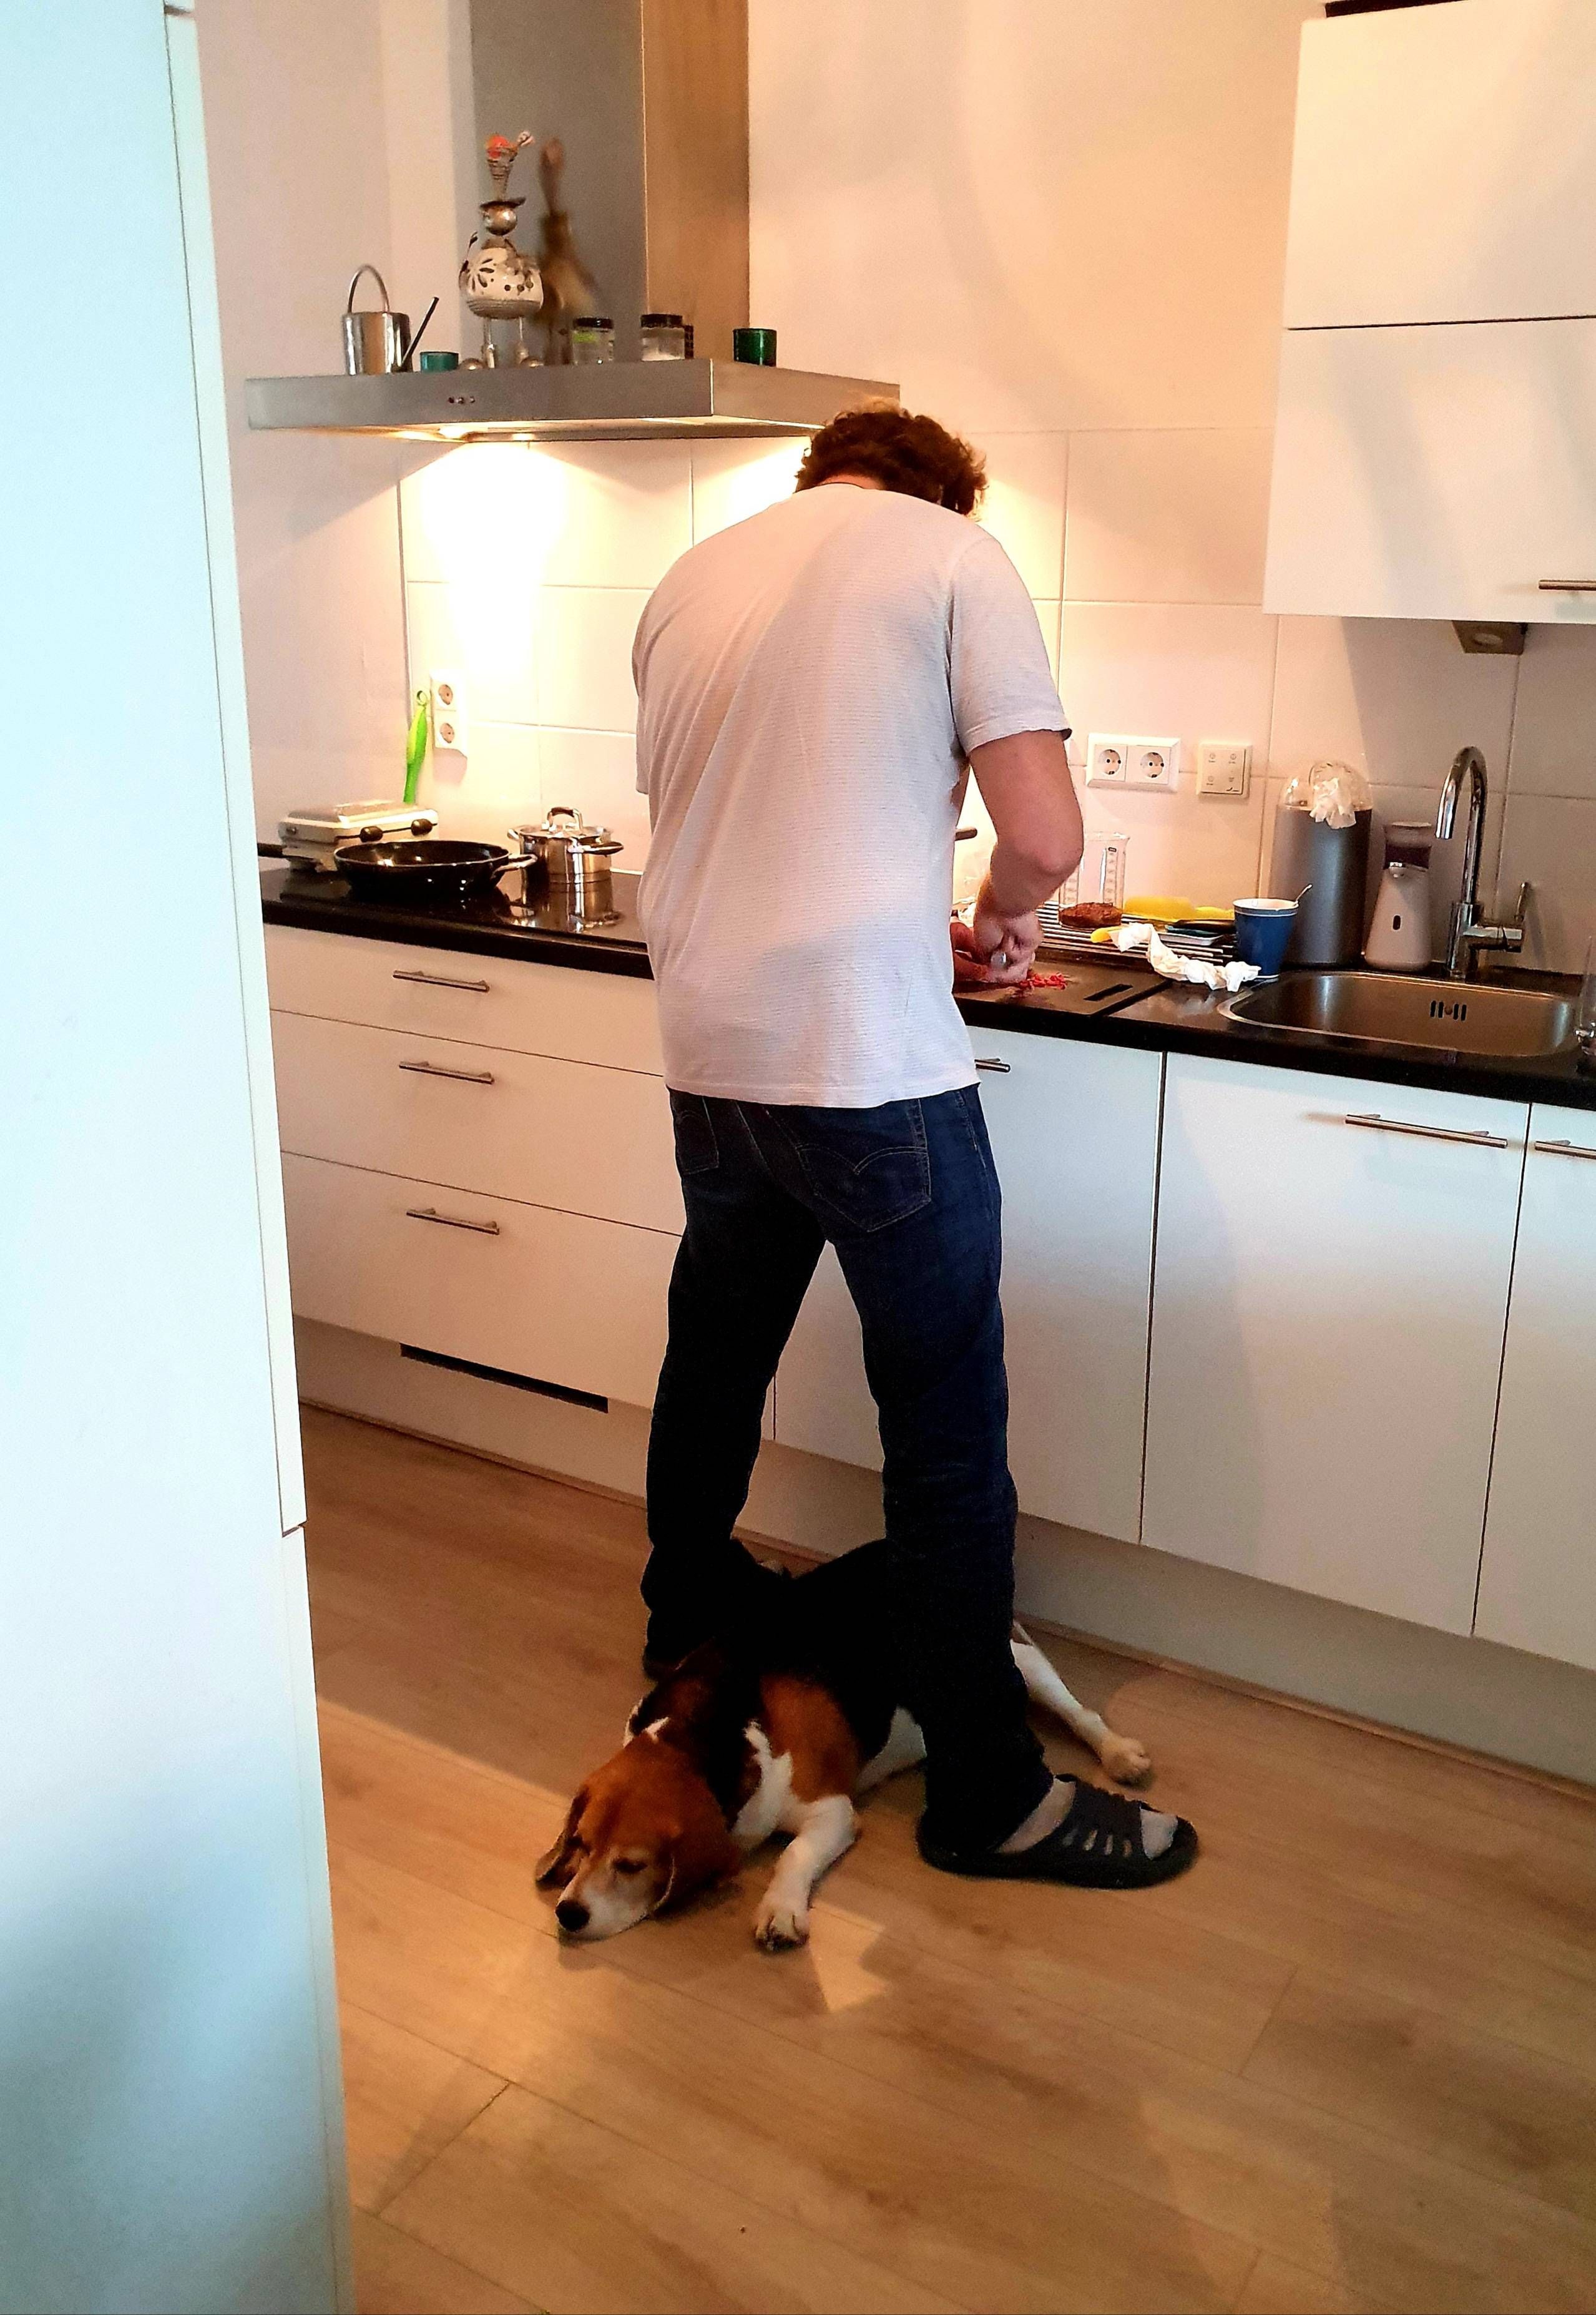 Who can relate? 'Cooking with a dog'